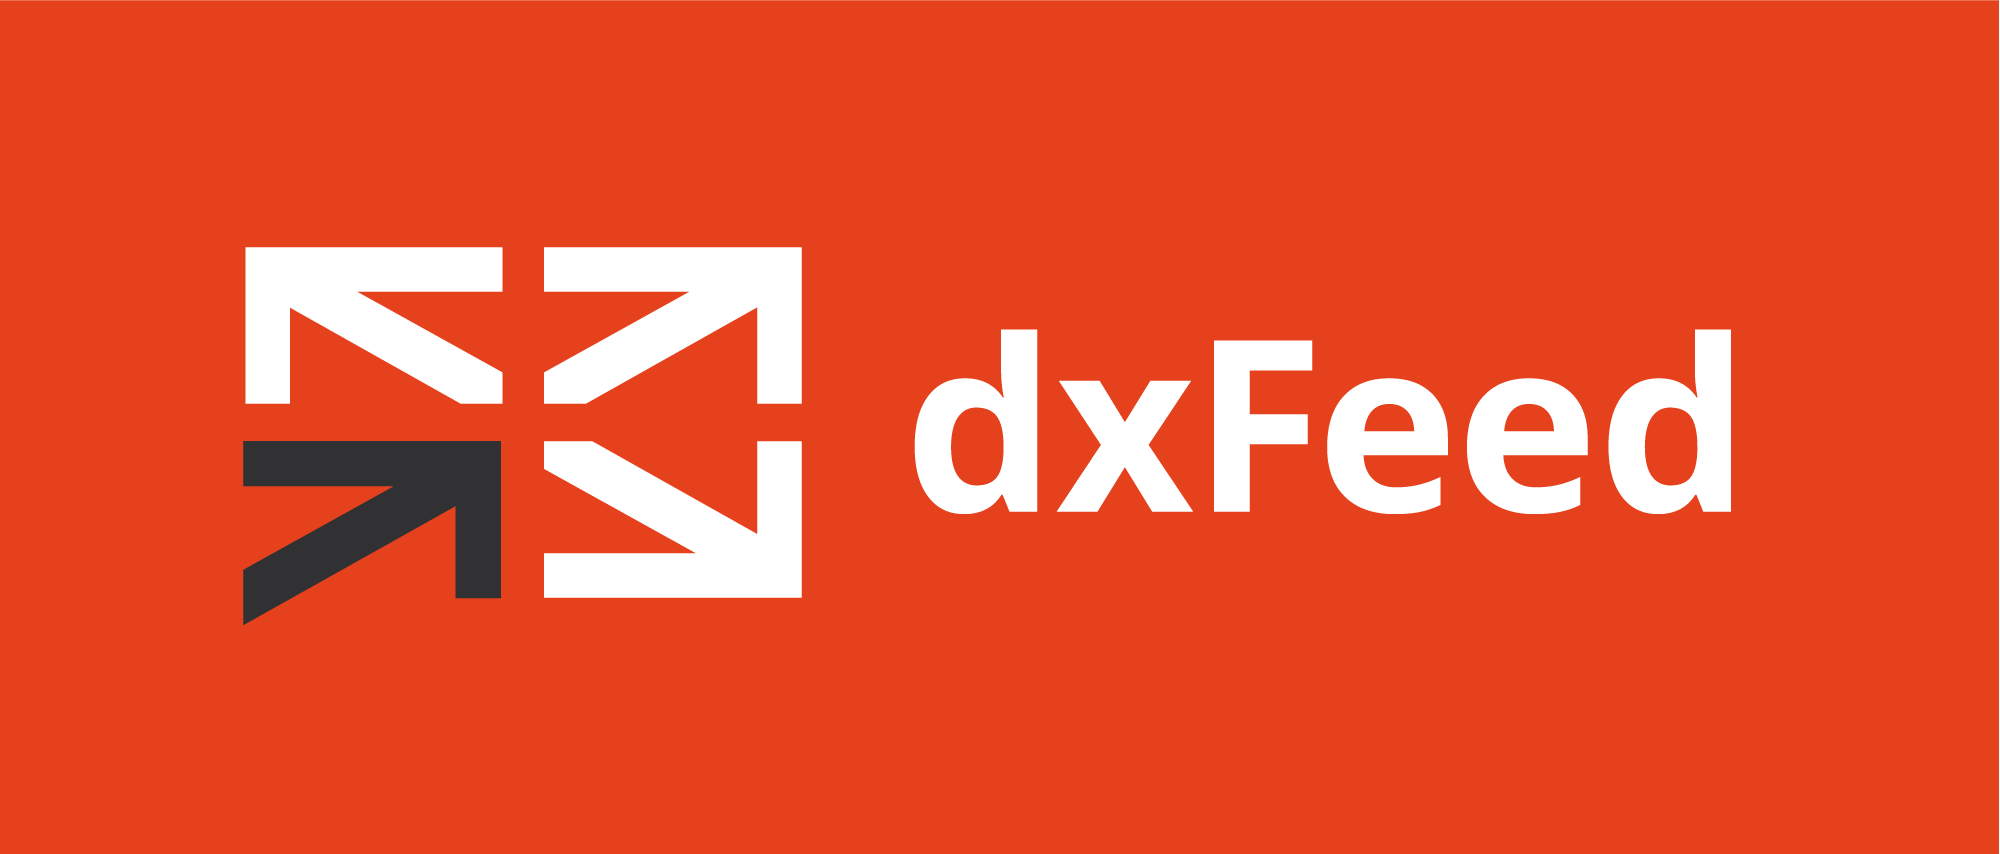 DxFeed backtesting